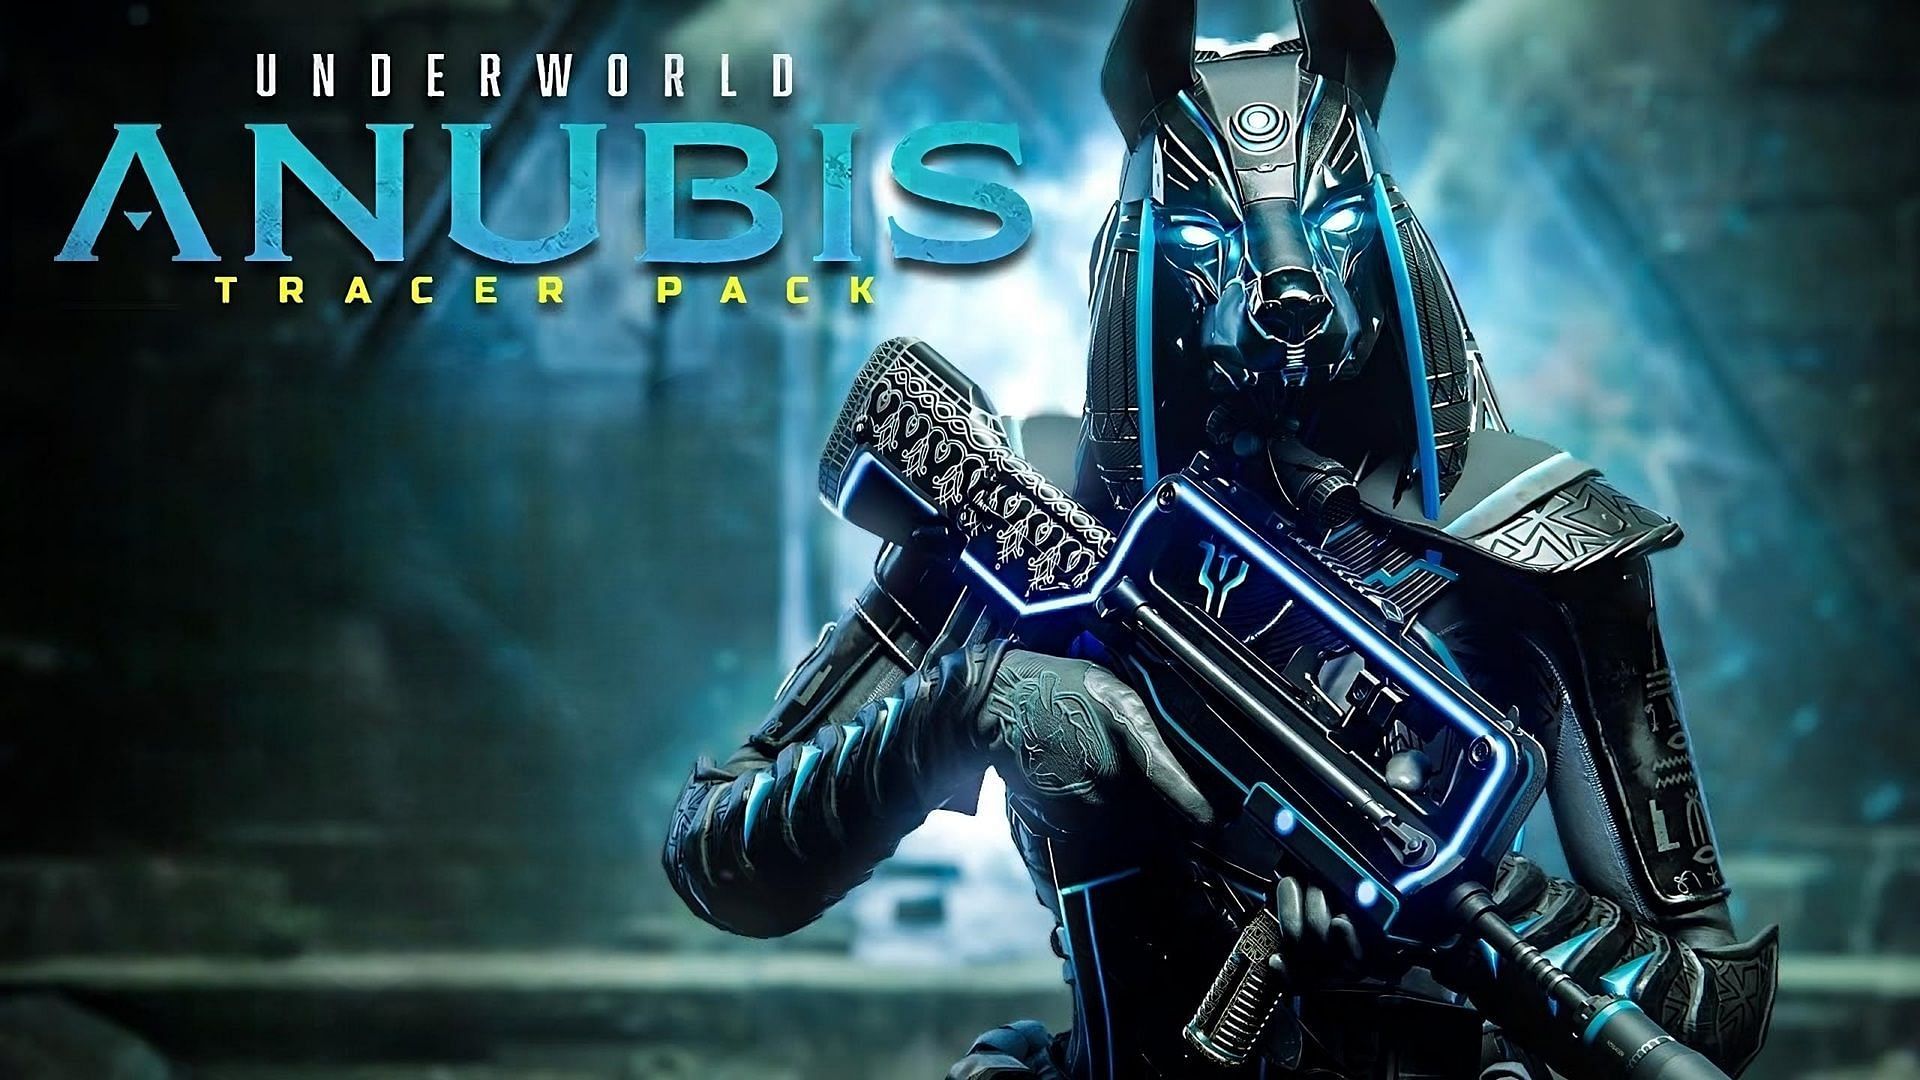 Underworld Anubis Tracer Pack in MW3 and Warzone